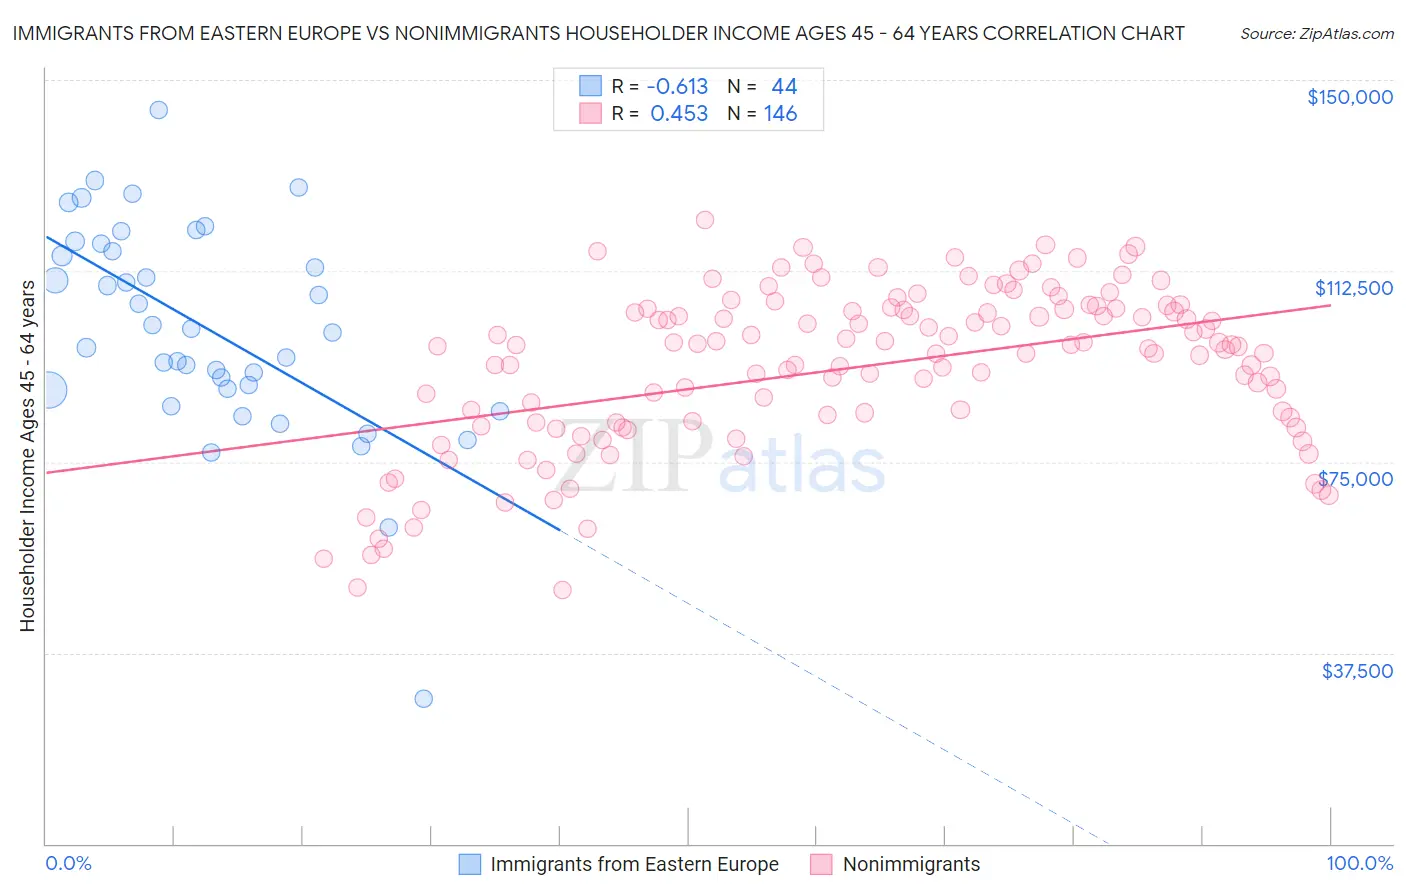 Immigrants from Eastern Europe vs Nonimmigrants Householder Income Ages 45 - 64 years